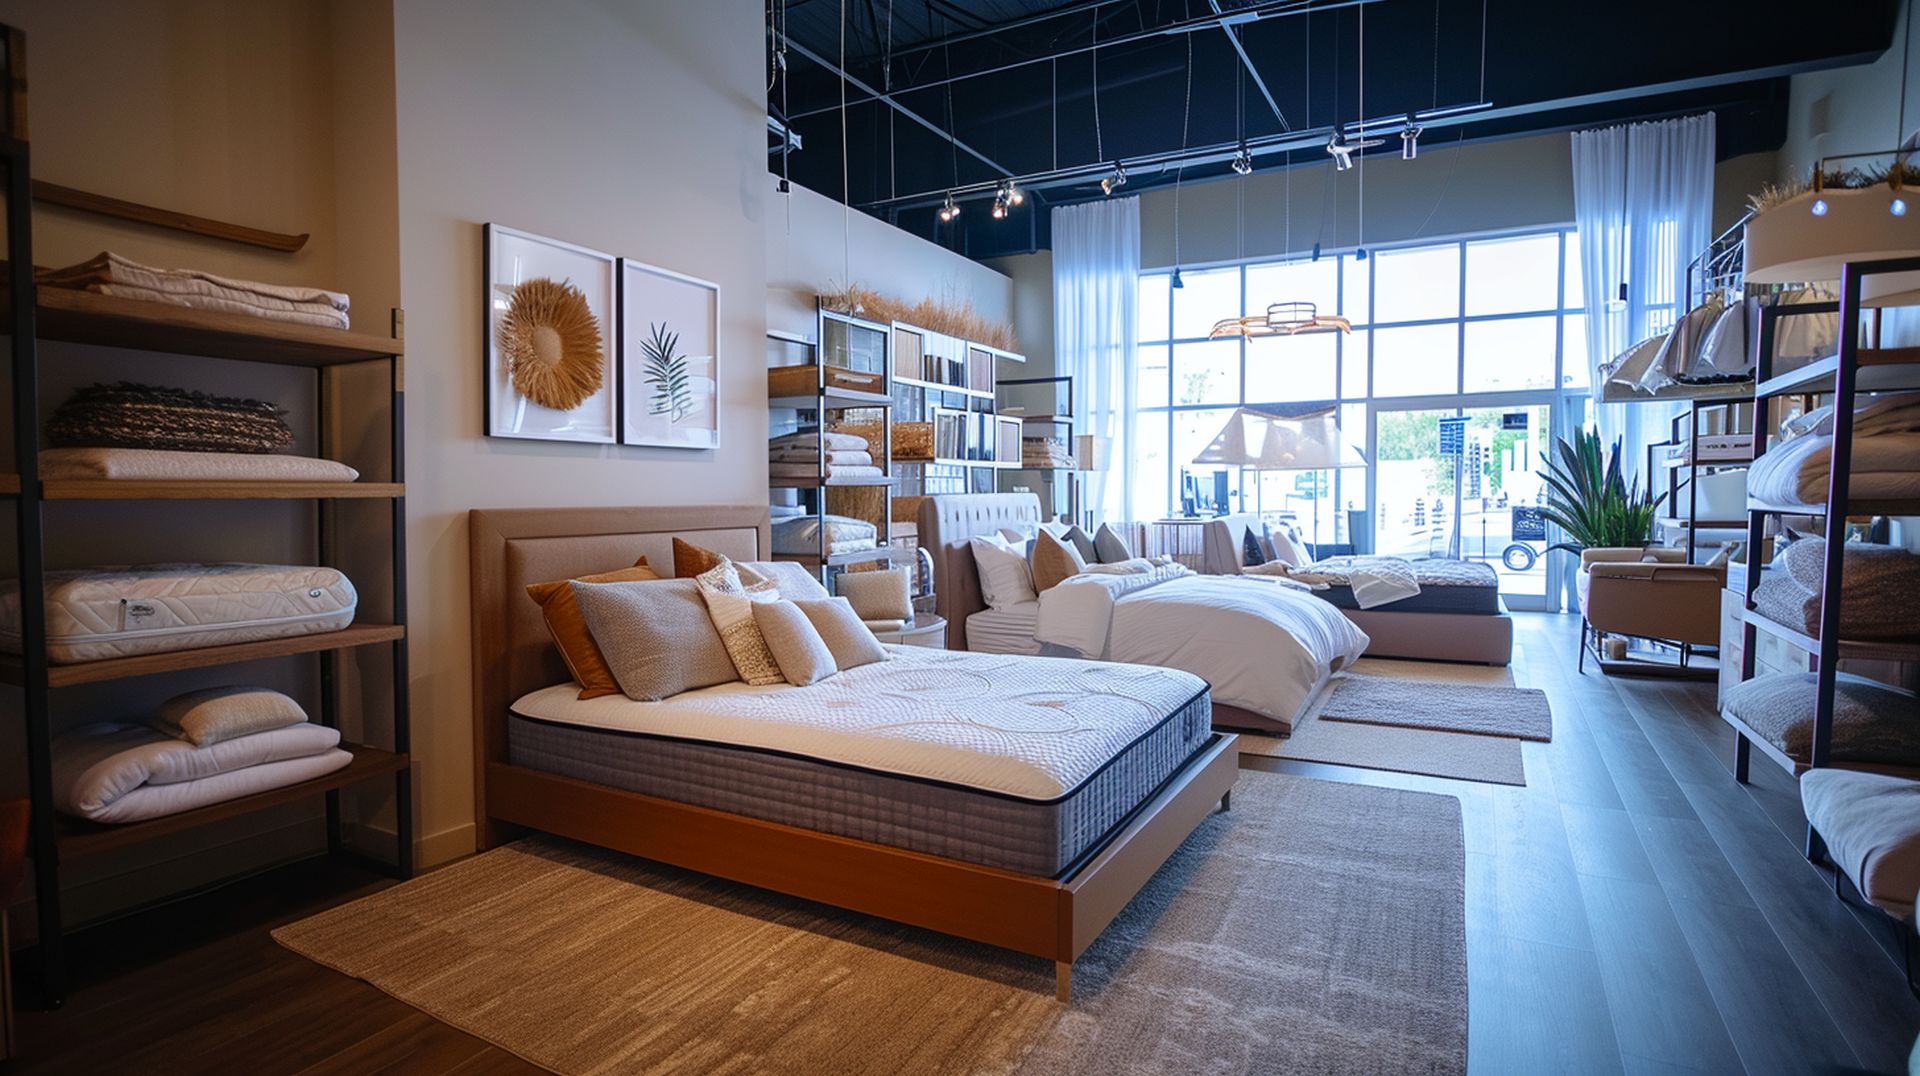 If you're looking for a new bed, mattress stores in Arlington offer the best customer and delivery service, financing, and warranties in Texas